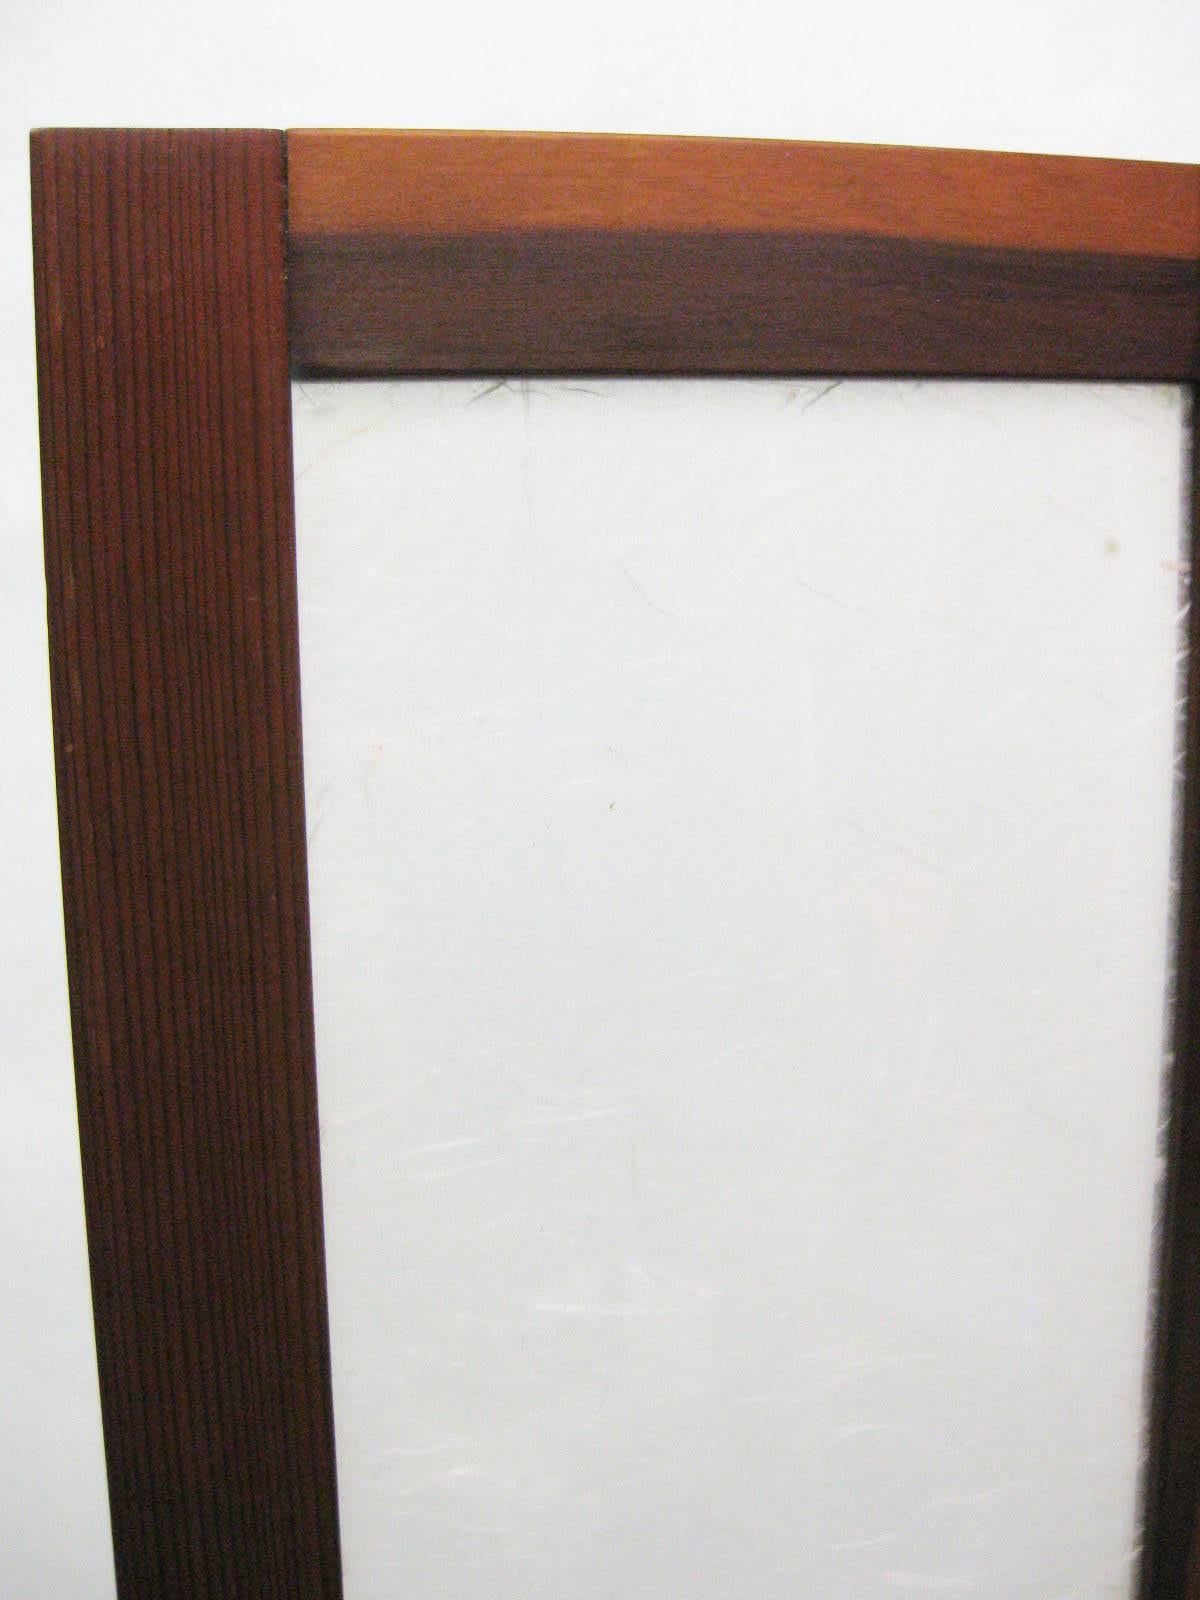 White textured fiberglass with teak hinged folding screens or room dividers.